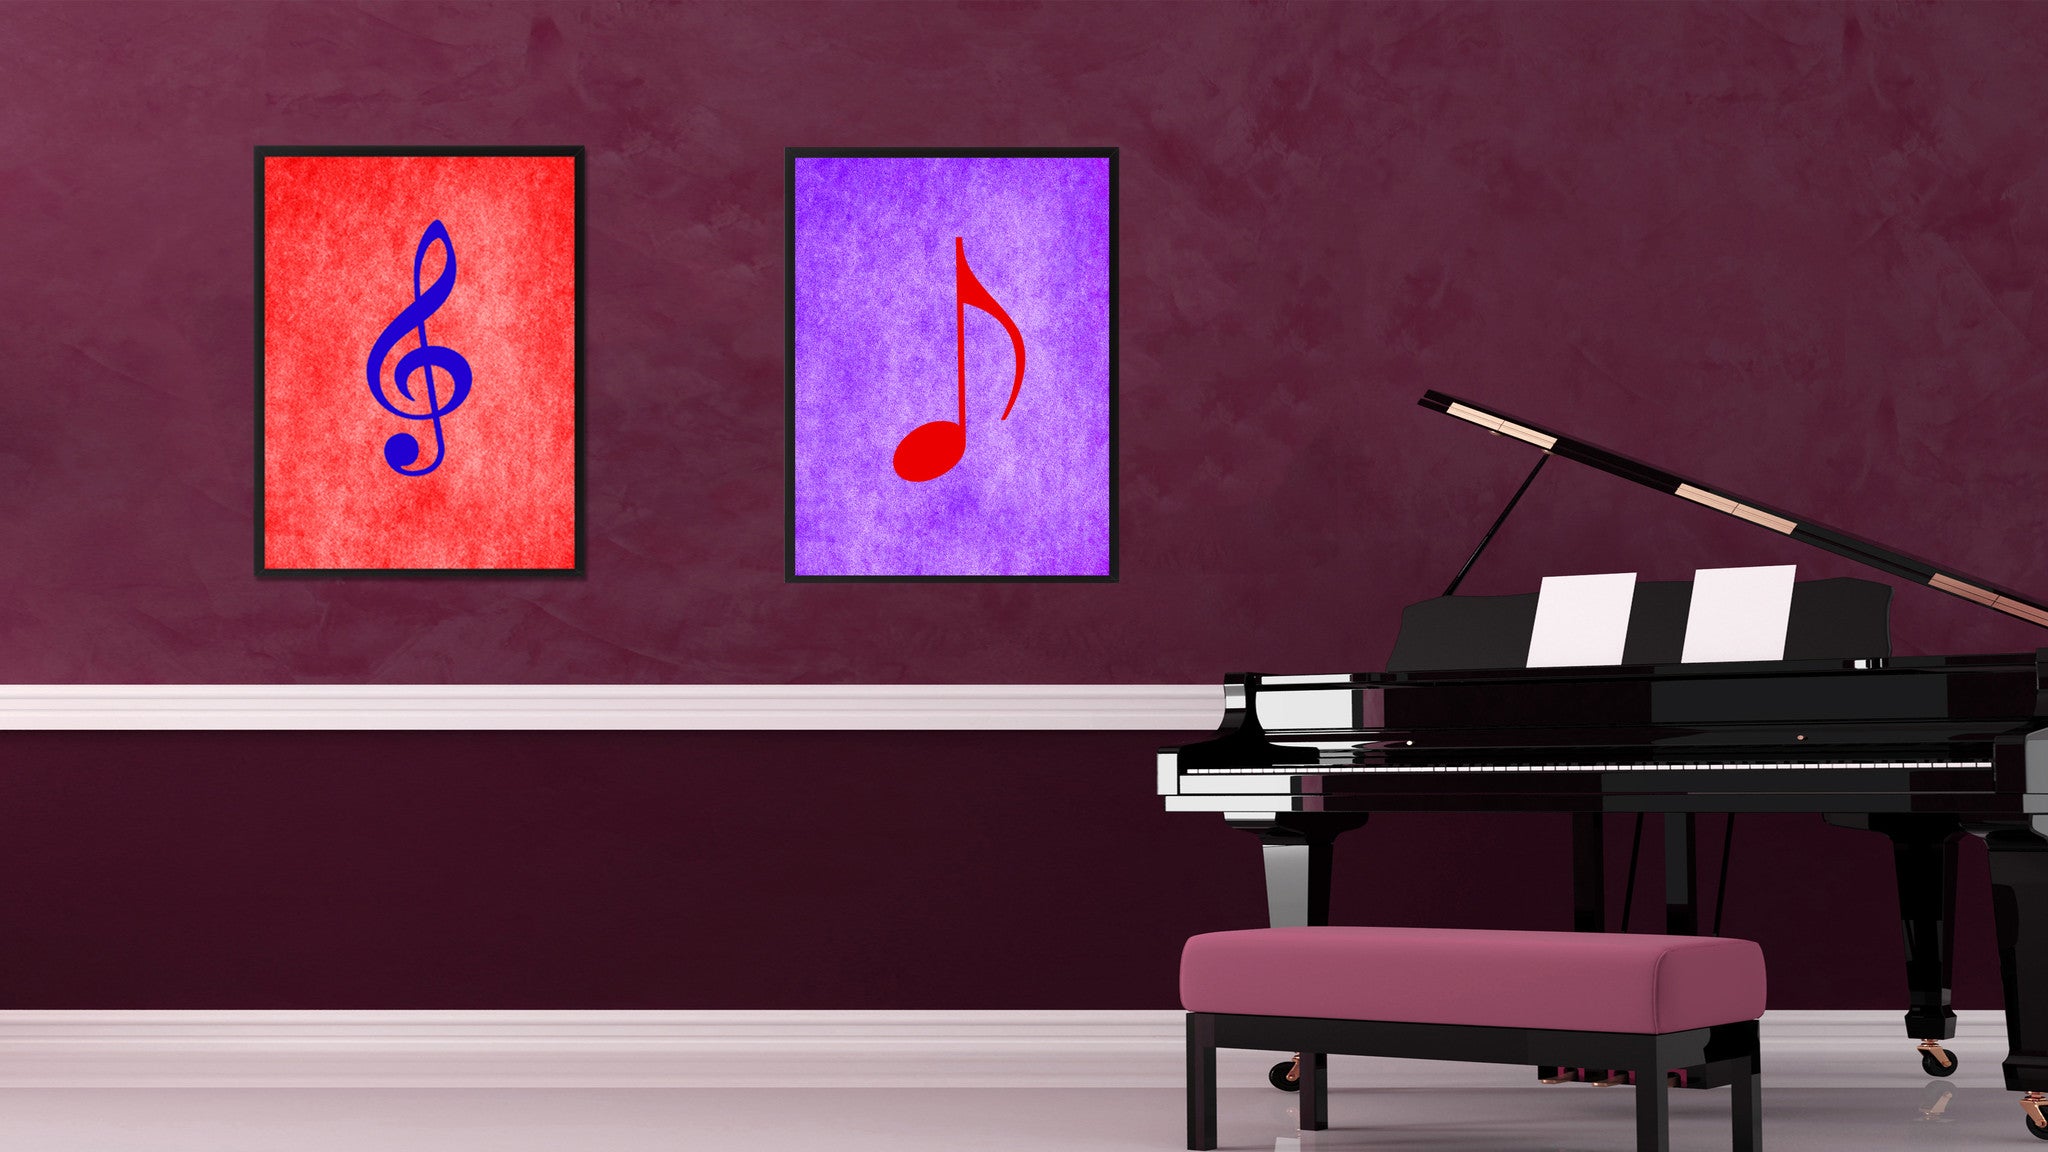 Quaver Music Purple Canvas Print Pictures Frames Office Home Décor Wall Art Gifts